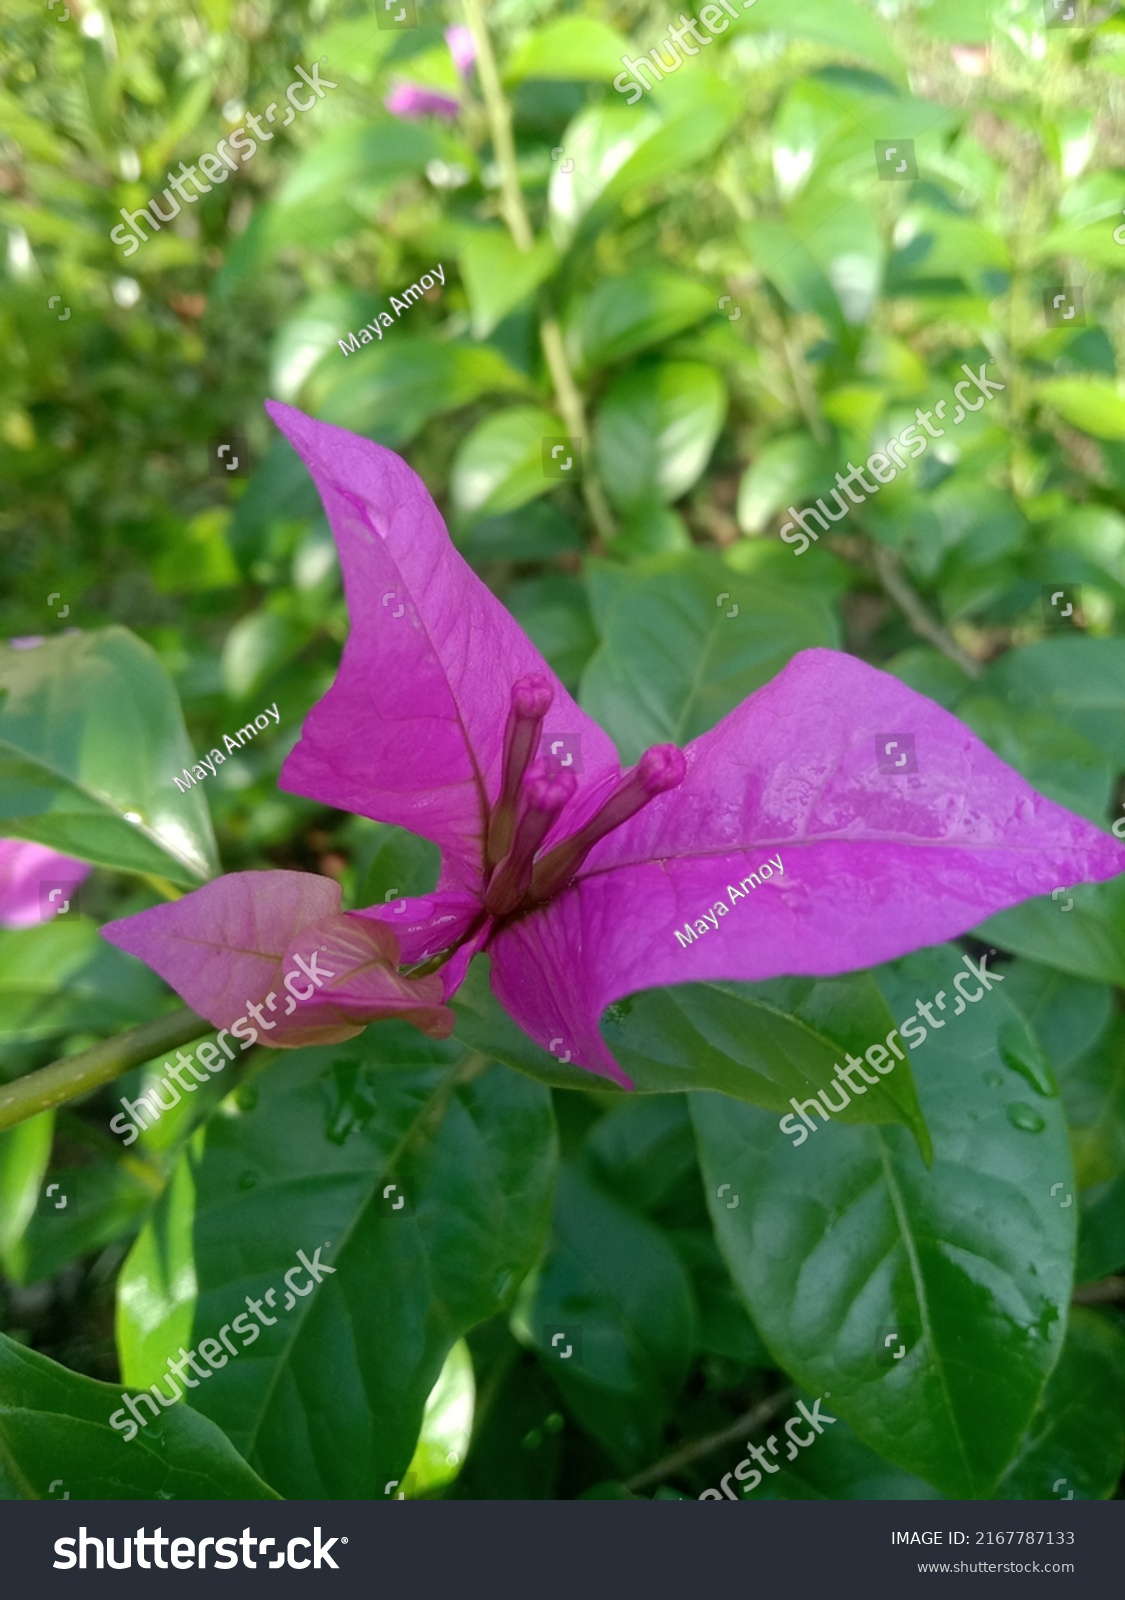 one type of local purple bougainvillea,
which has the nickname paper flower because the petals are very thin and look like paper #2167787133